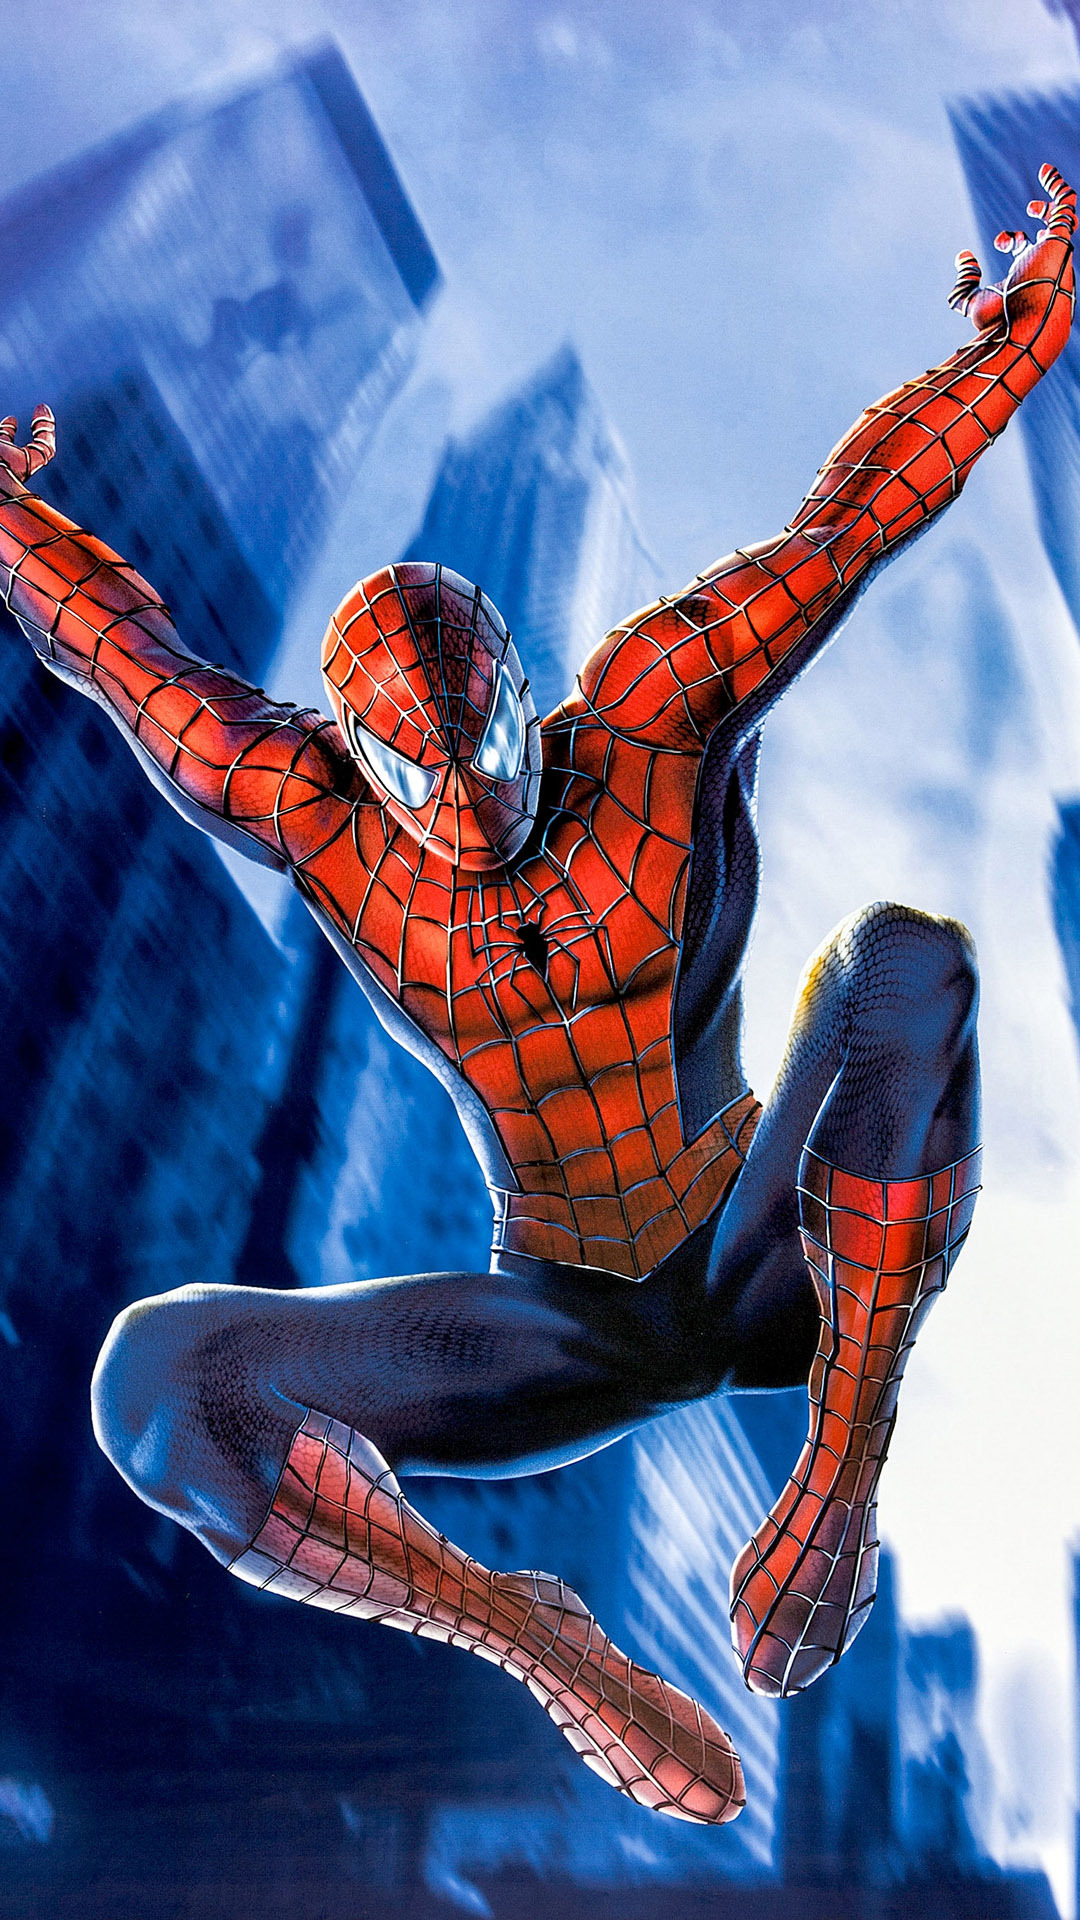 Free Download Spiderman Background For Iphone - Raimi Spiderman Wallpaper Iphone - HD Wallpaper 